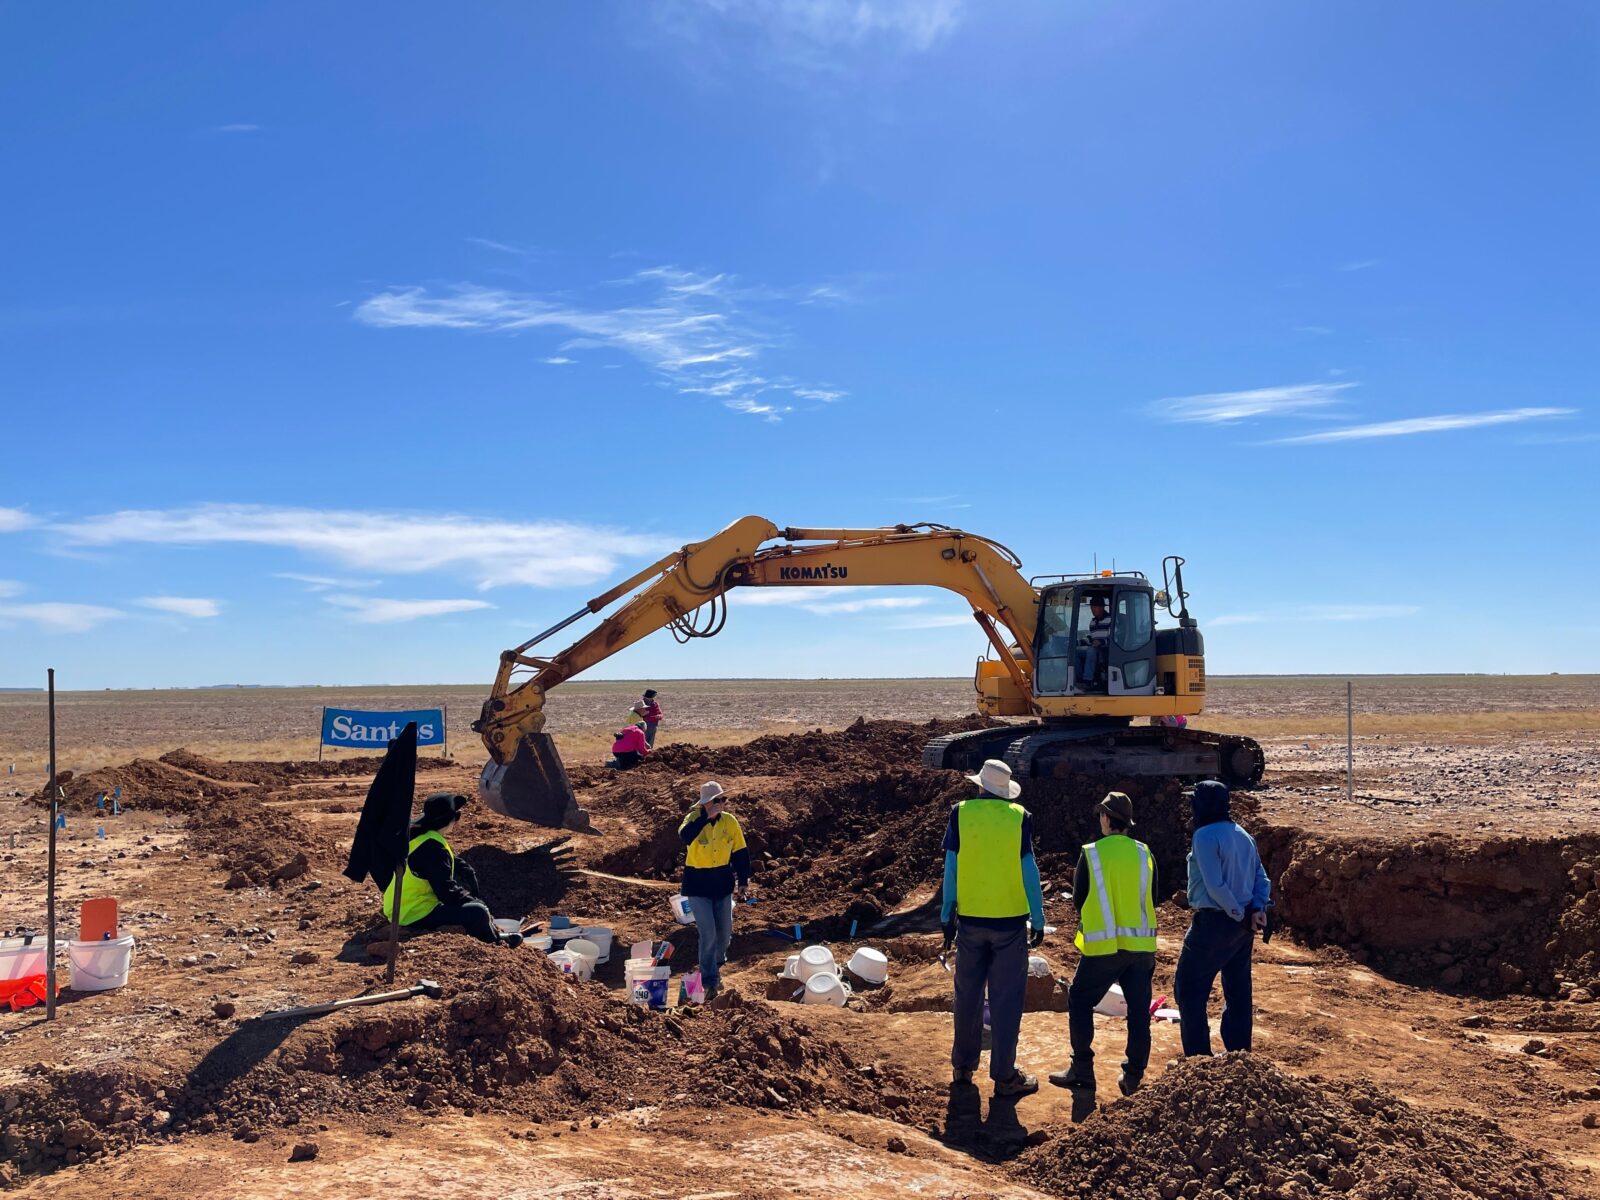 Dig site with heavy machinery and participants working in the dirt